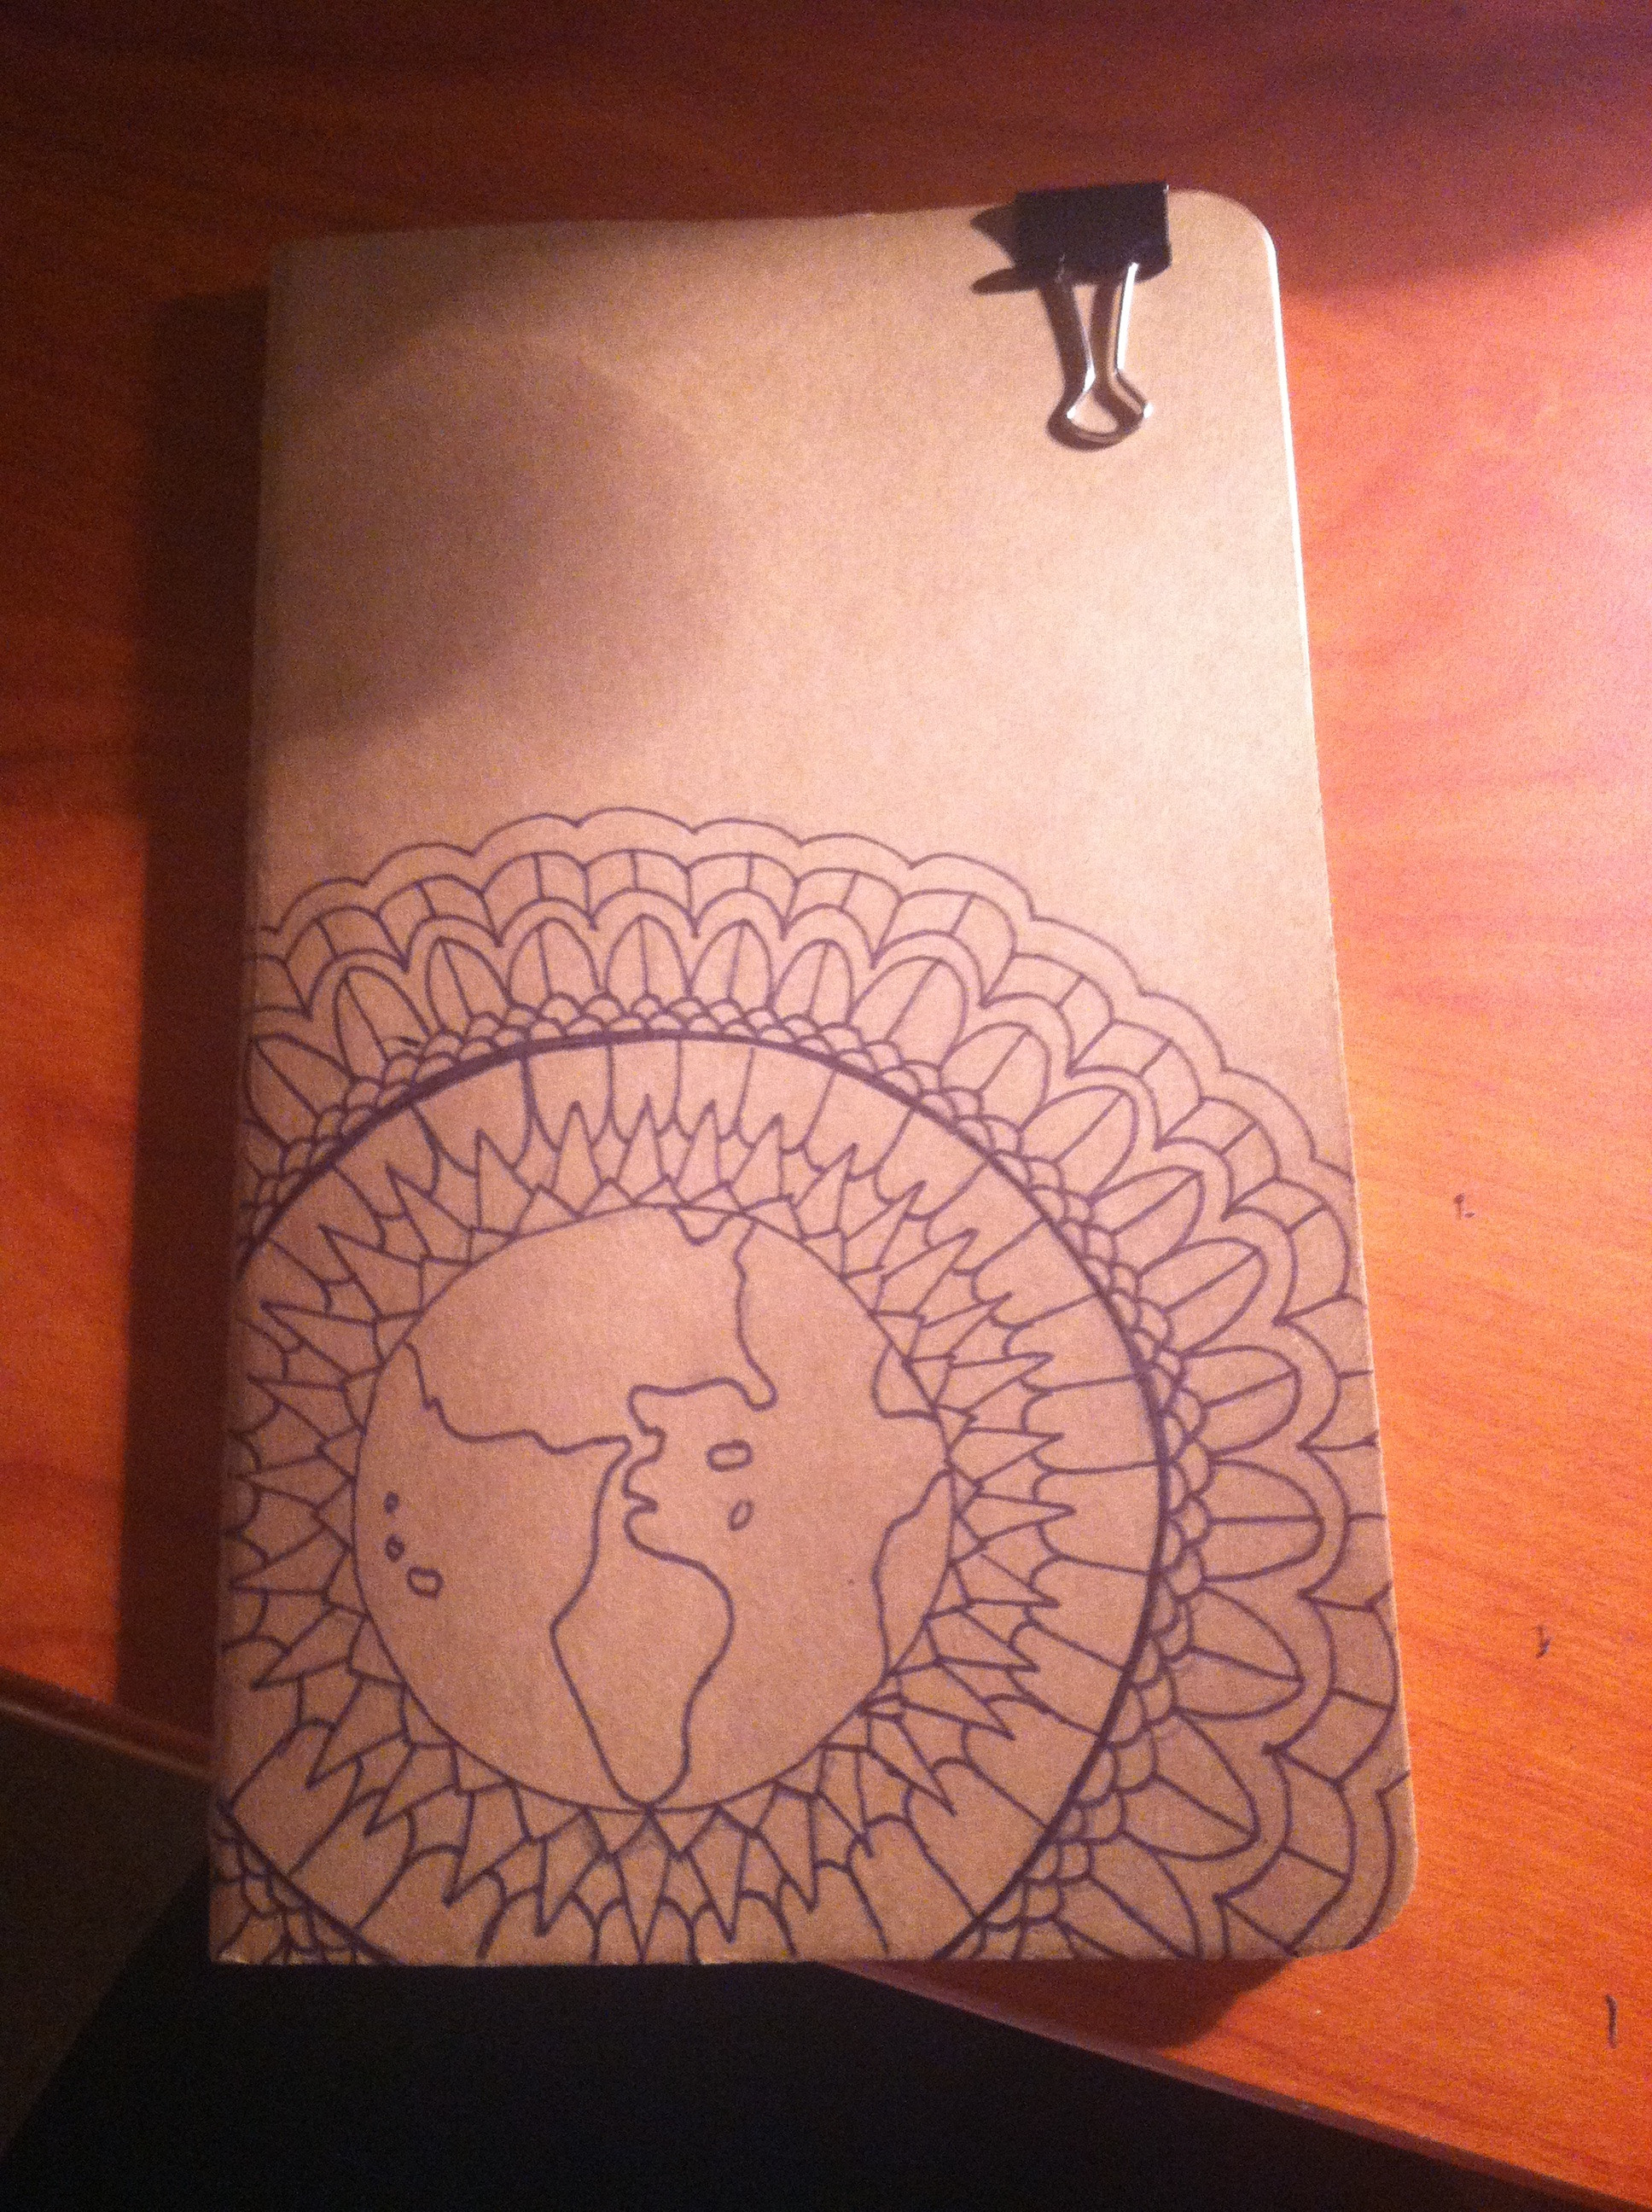 The whole world, in a notebook